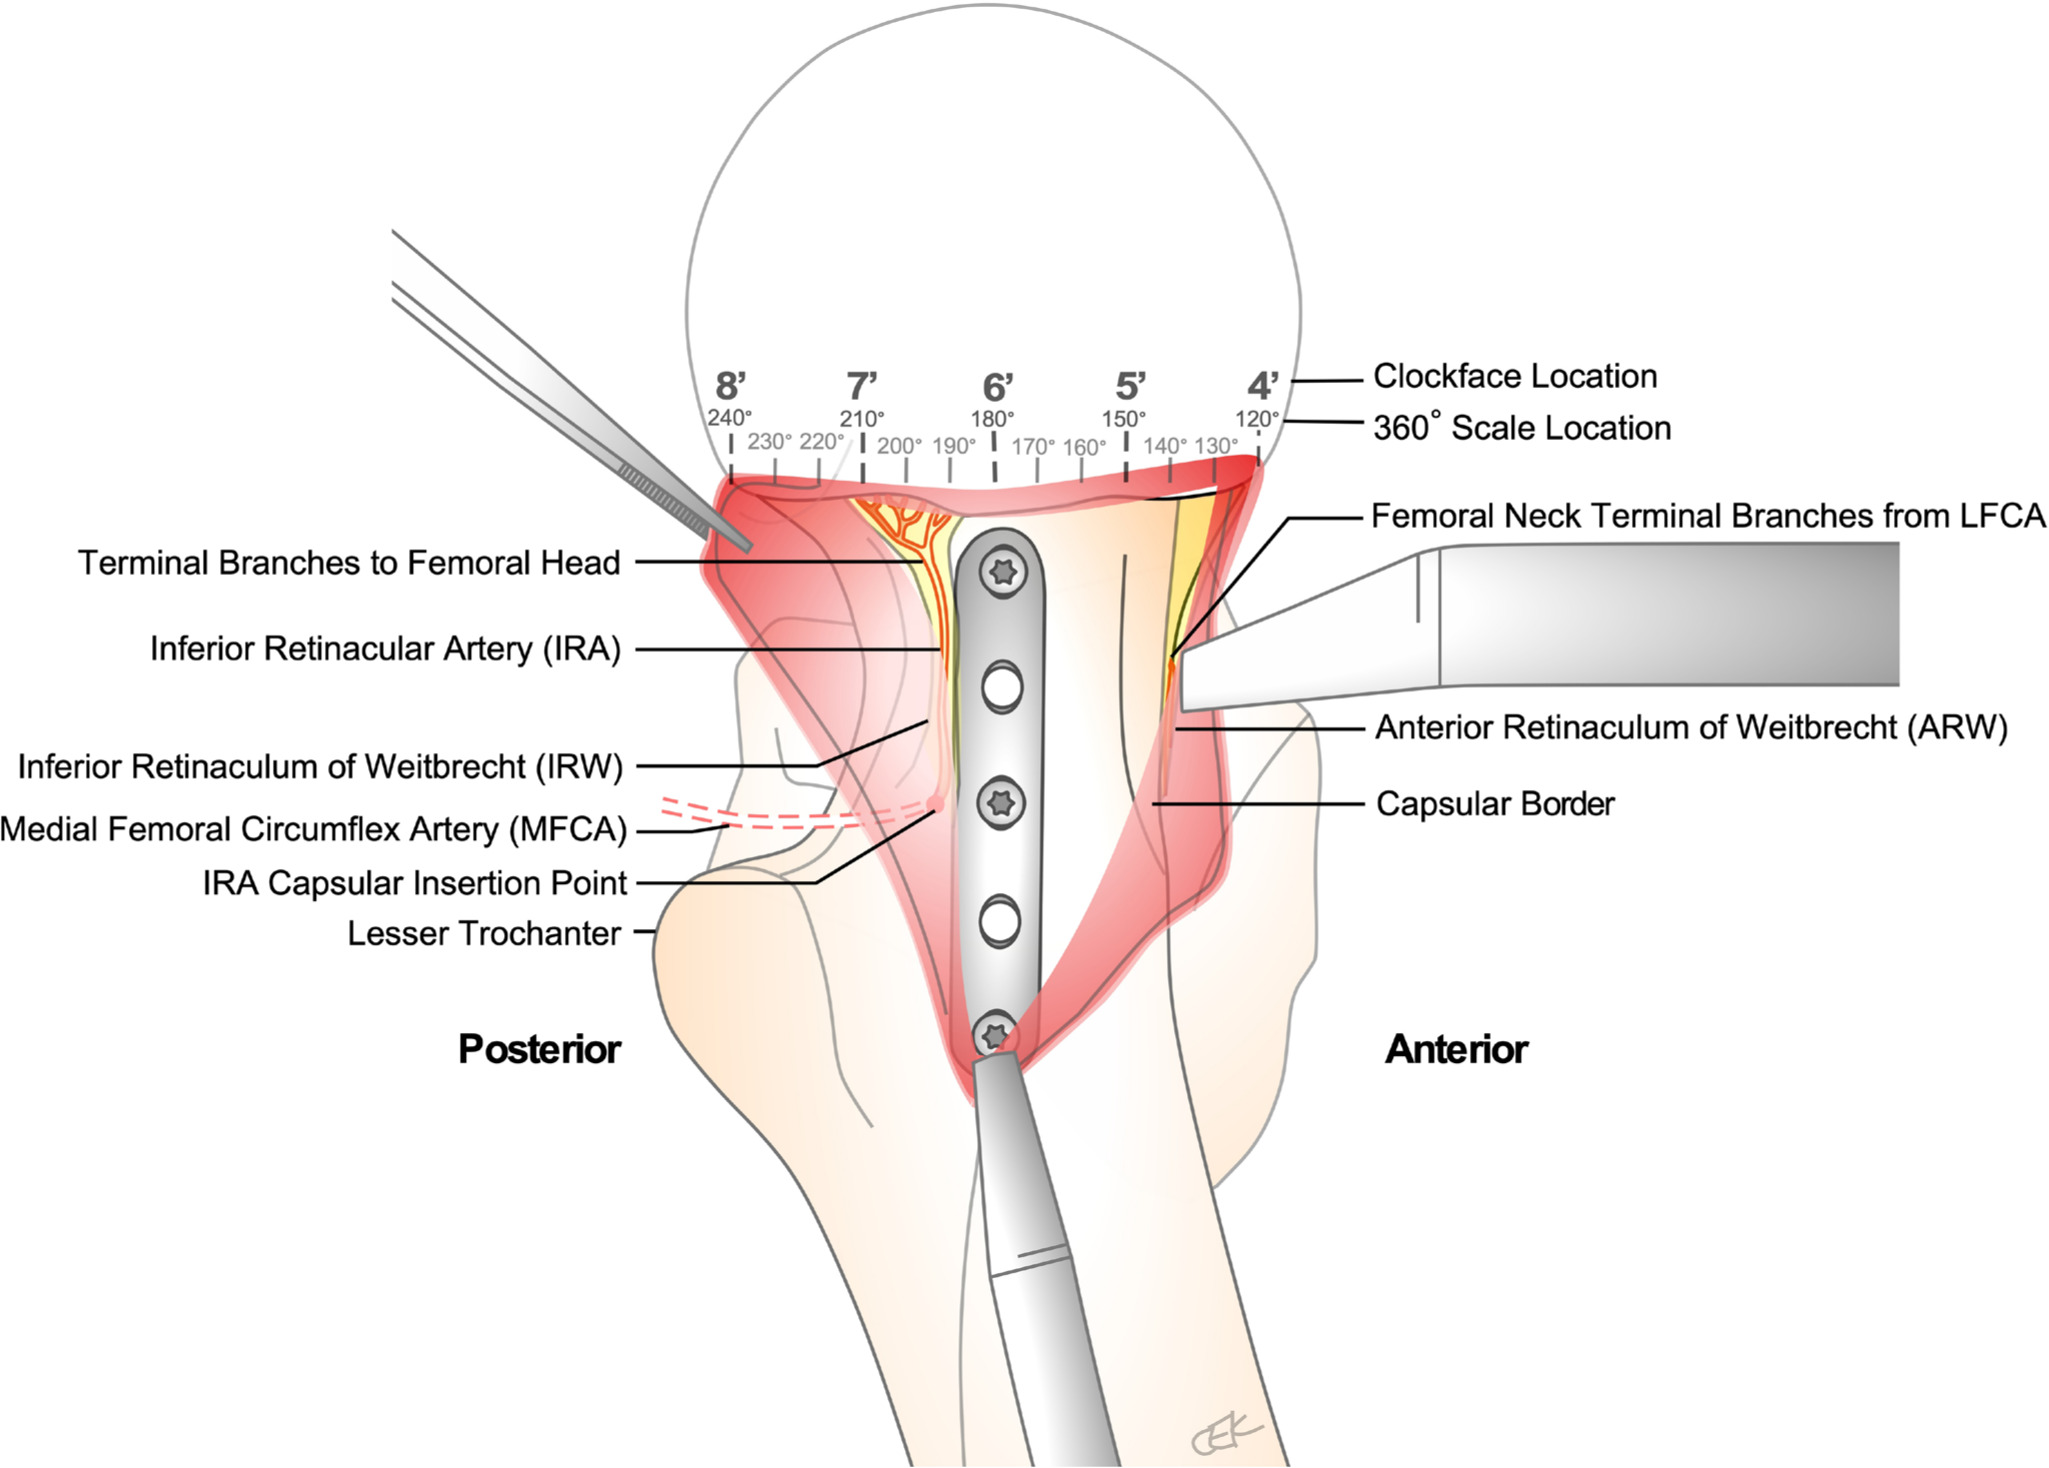 Fig. 4 
          Schematic of left femoral neck calcar following a Hueter approach, capsulotomy, and application of a one-third tubular plate at the 6:00 position on the clockface, where 12:00 is defined as the superior neck and 3:00 is defined as the anterior neck. The inferior retinacular artery (IRA), a terminal branch of the MFCA, courses along the posteroinferior neck within the inferior retinaculum of Weitbrecht (IRW). It is critical to preserve the IRA, and its vascular supply to the femoral head, while securing a buttress plate along the femoral neck calcar at 6:00. This is done through elevation of the inferior capsule and IRW off bone, placement of a Hohmann retractor along the inferior femoral neck, and hip external rotation with slight flexion.
        